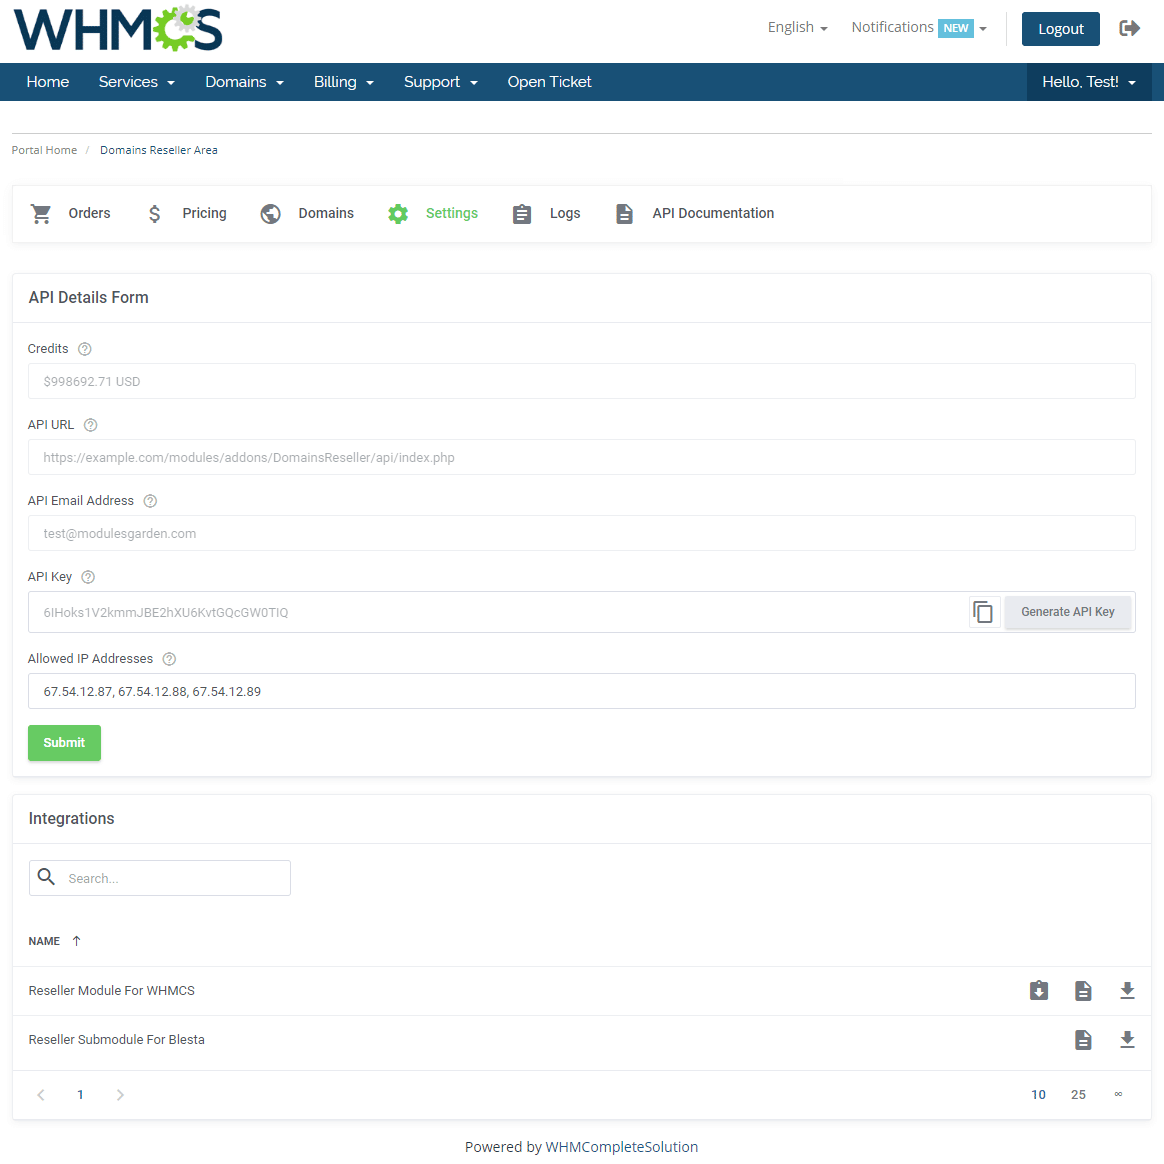 Domains Reseller For WHMCS